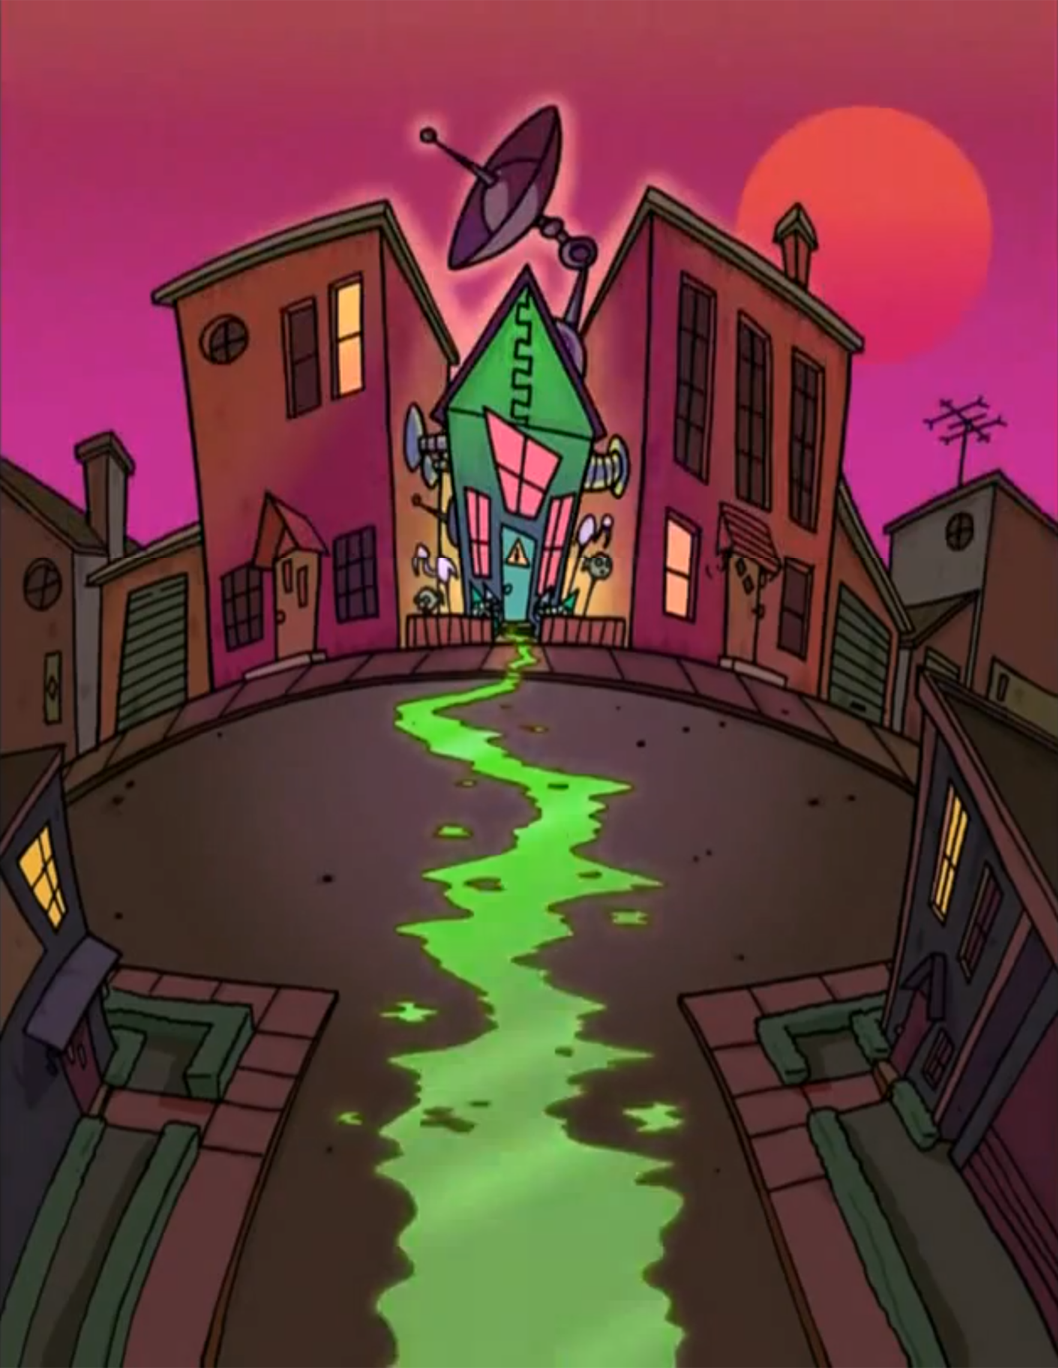 Image - Zim's house and neighborhood (with slime).png - Invader ZIM Wi...